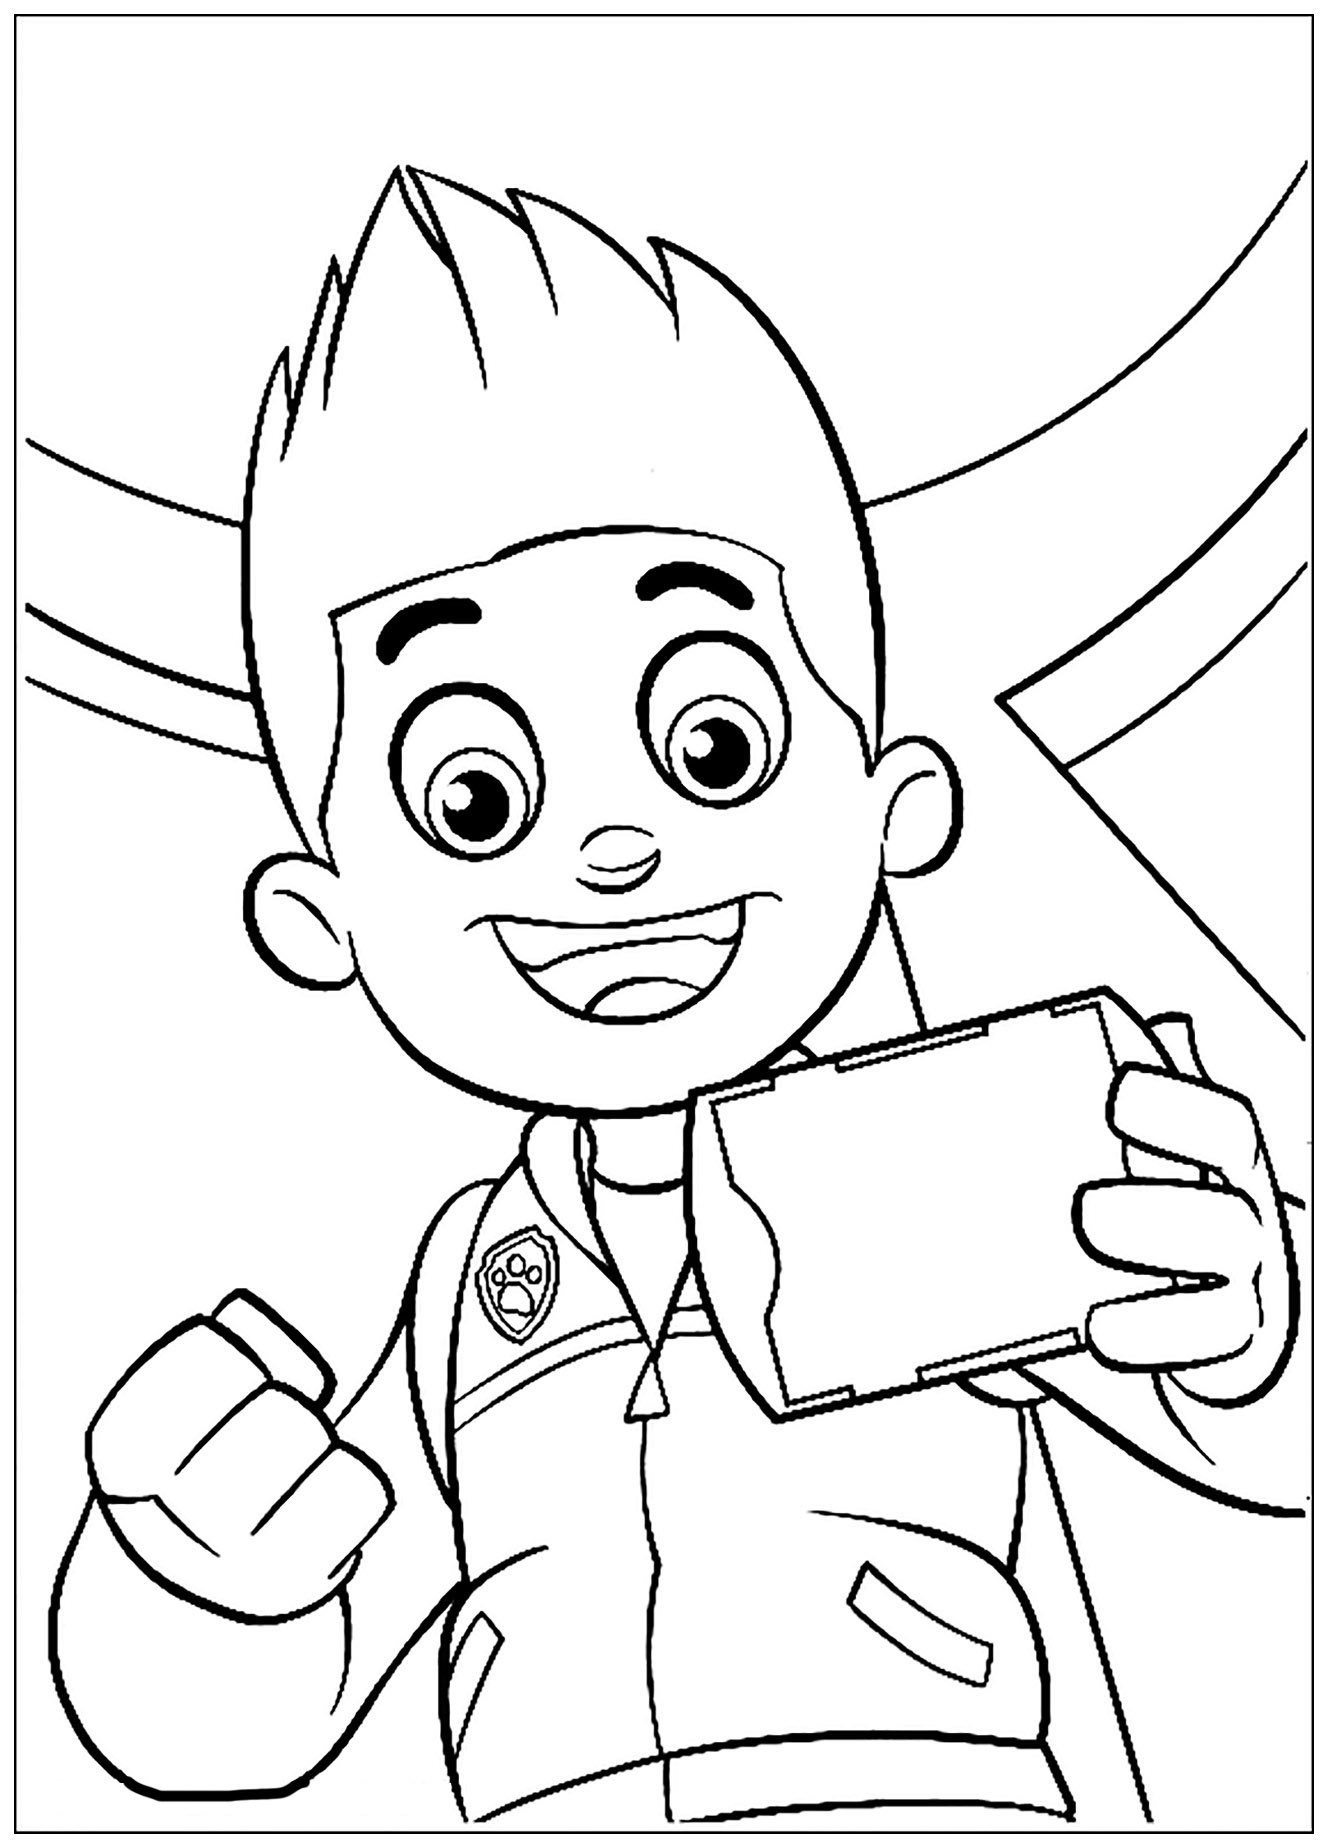 Paw patrol free to color for children - Paw Patrol Kids Coloring Pages